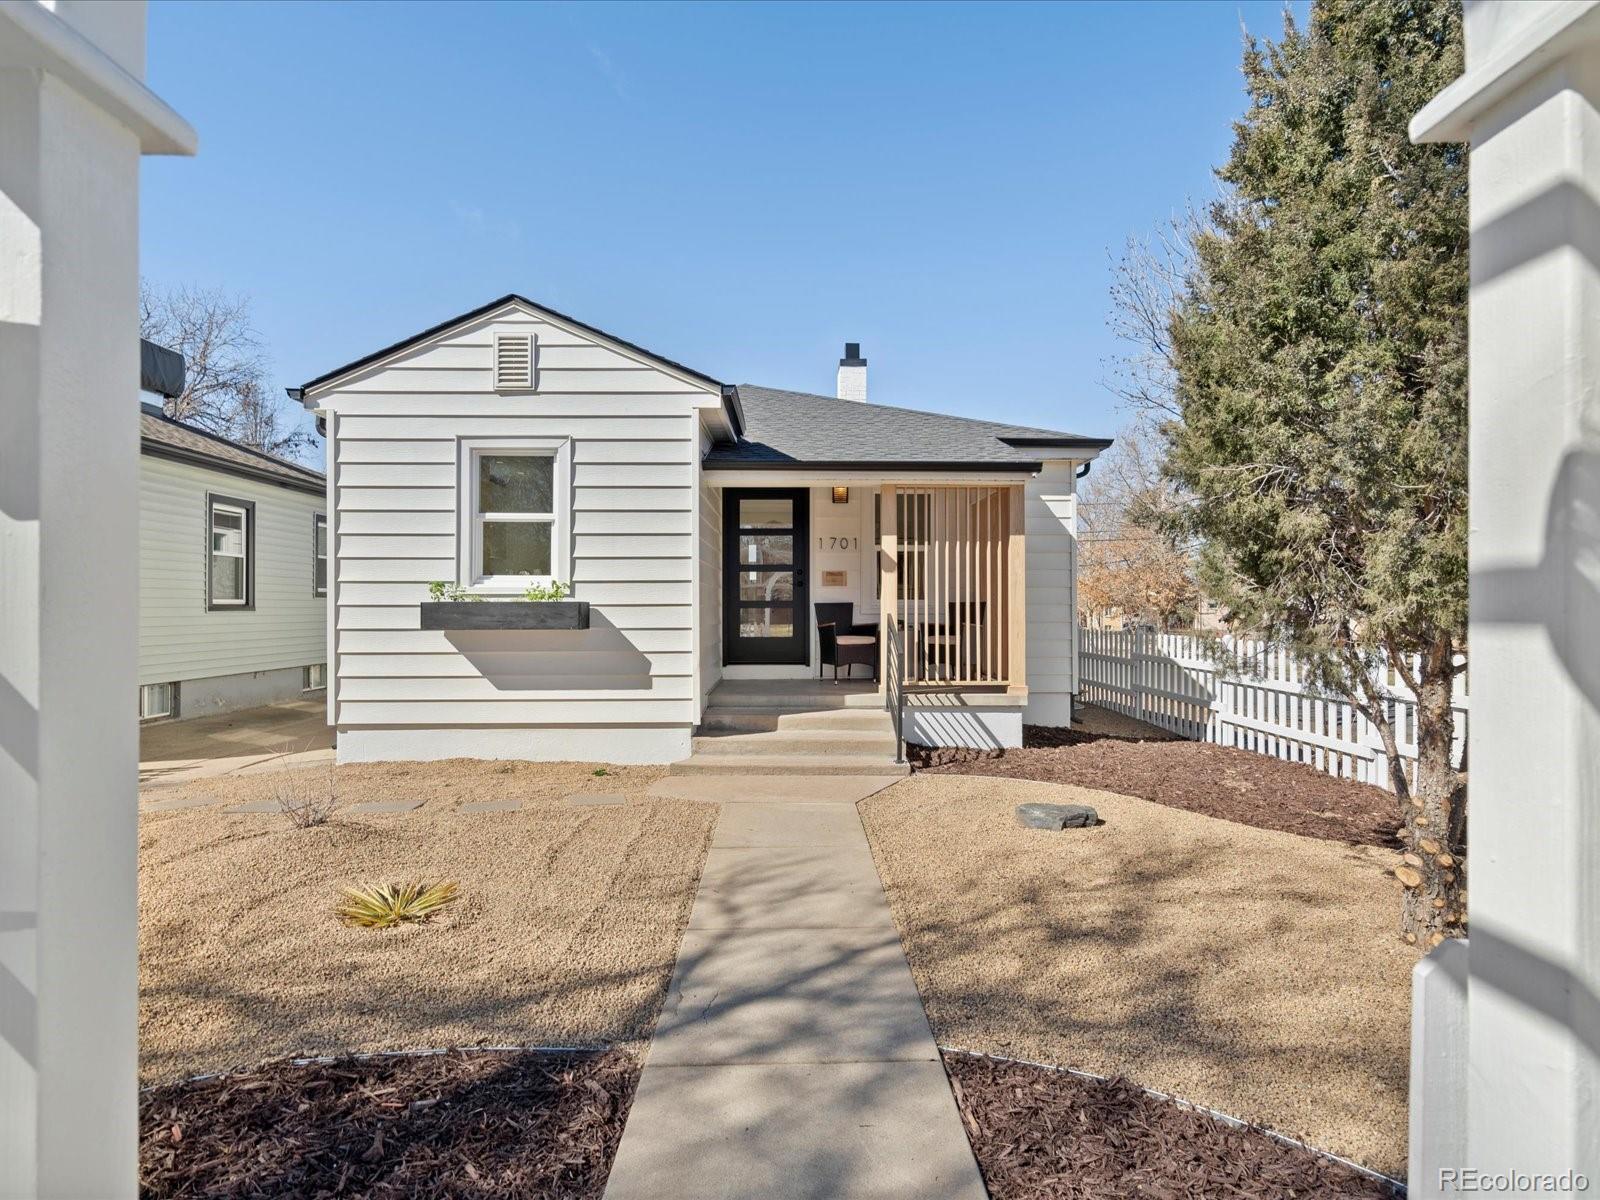 1701 s downing street, denver sold home. Closed on 2024-04-01 for $843,000.